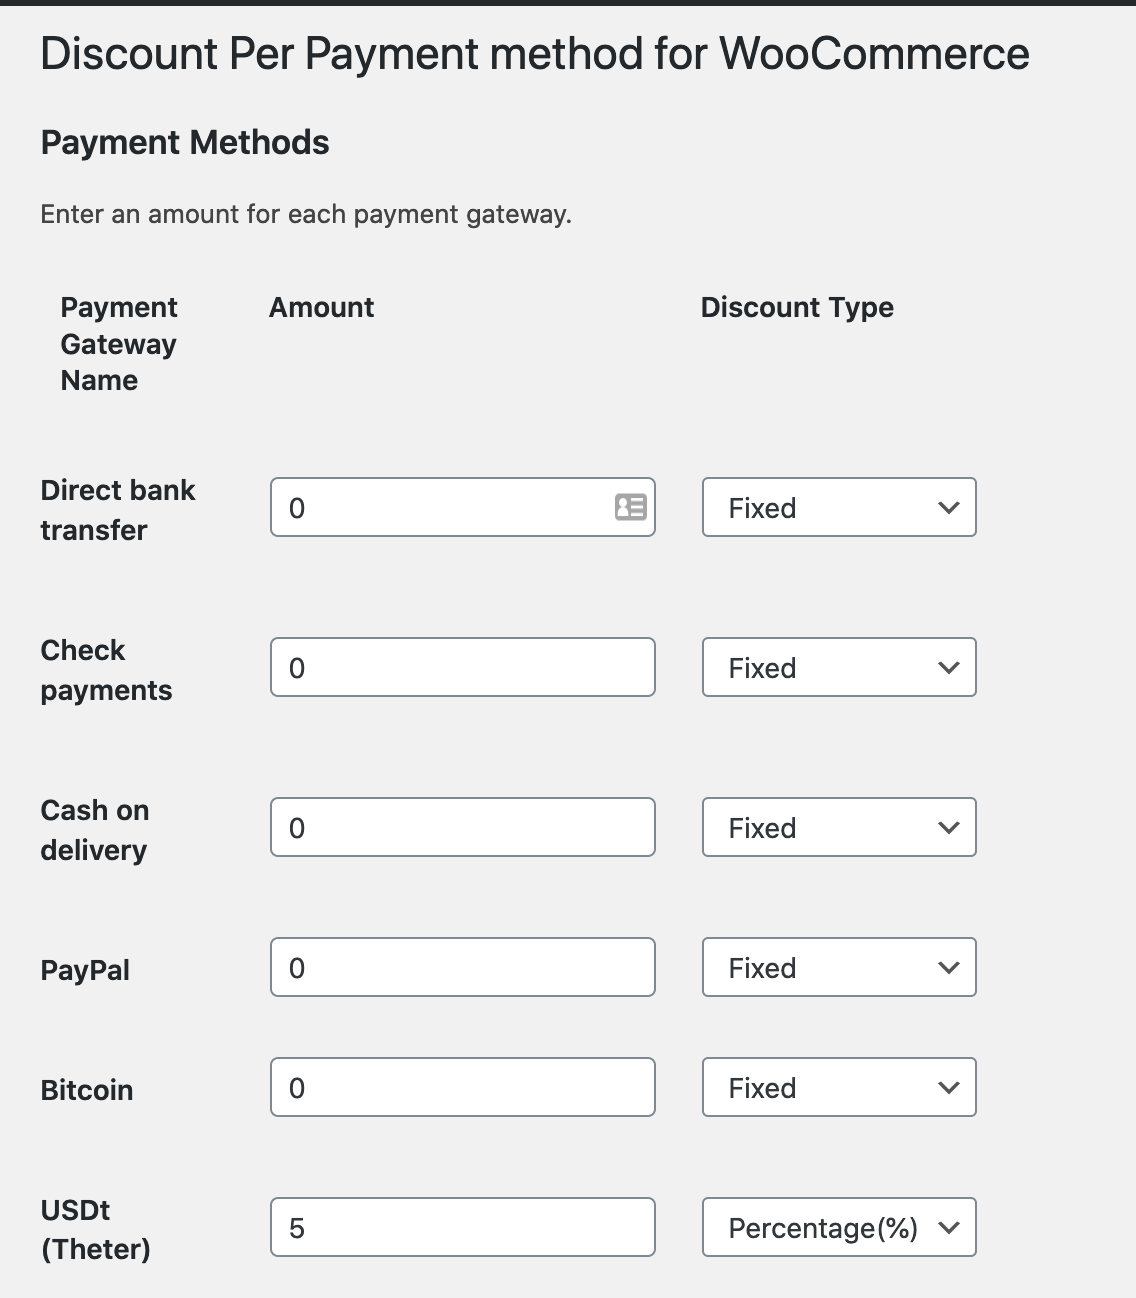 Settings for discounts per available payment method